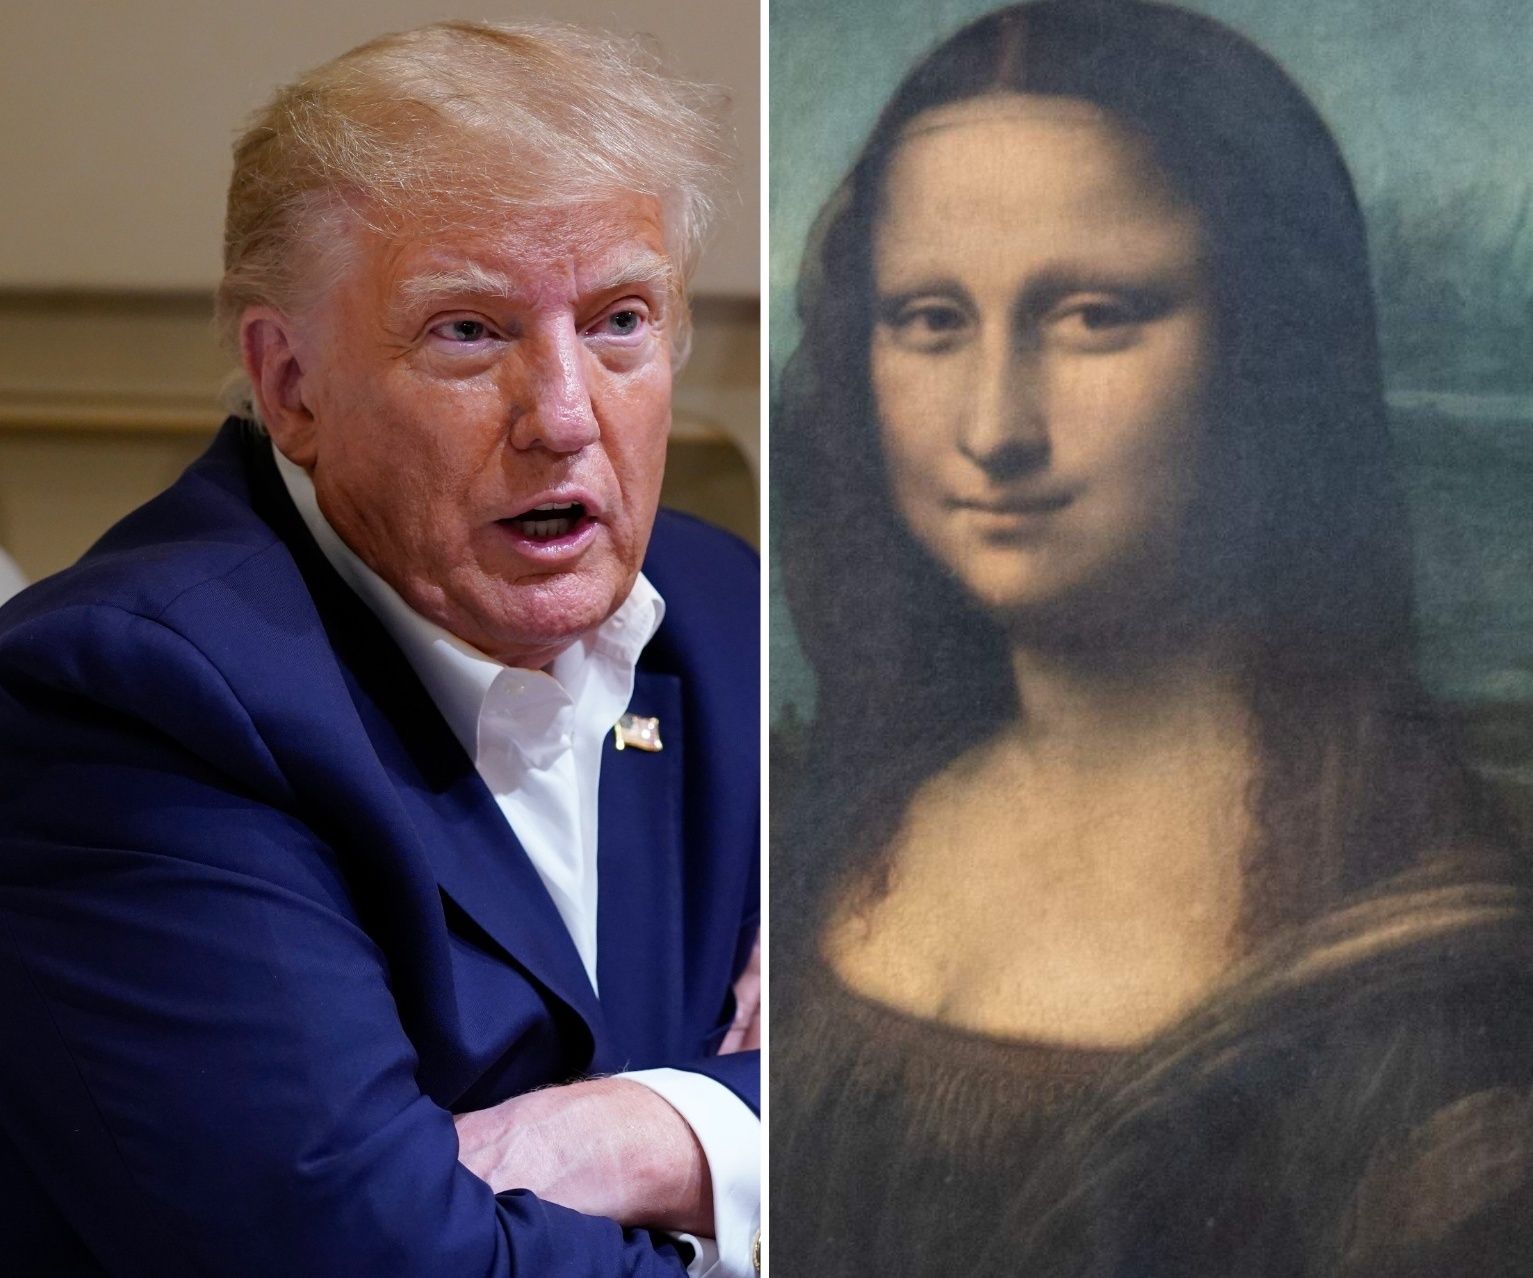 Donald Trump compares himself to the Mona Lisa in new interview